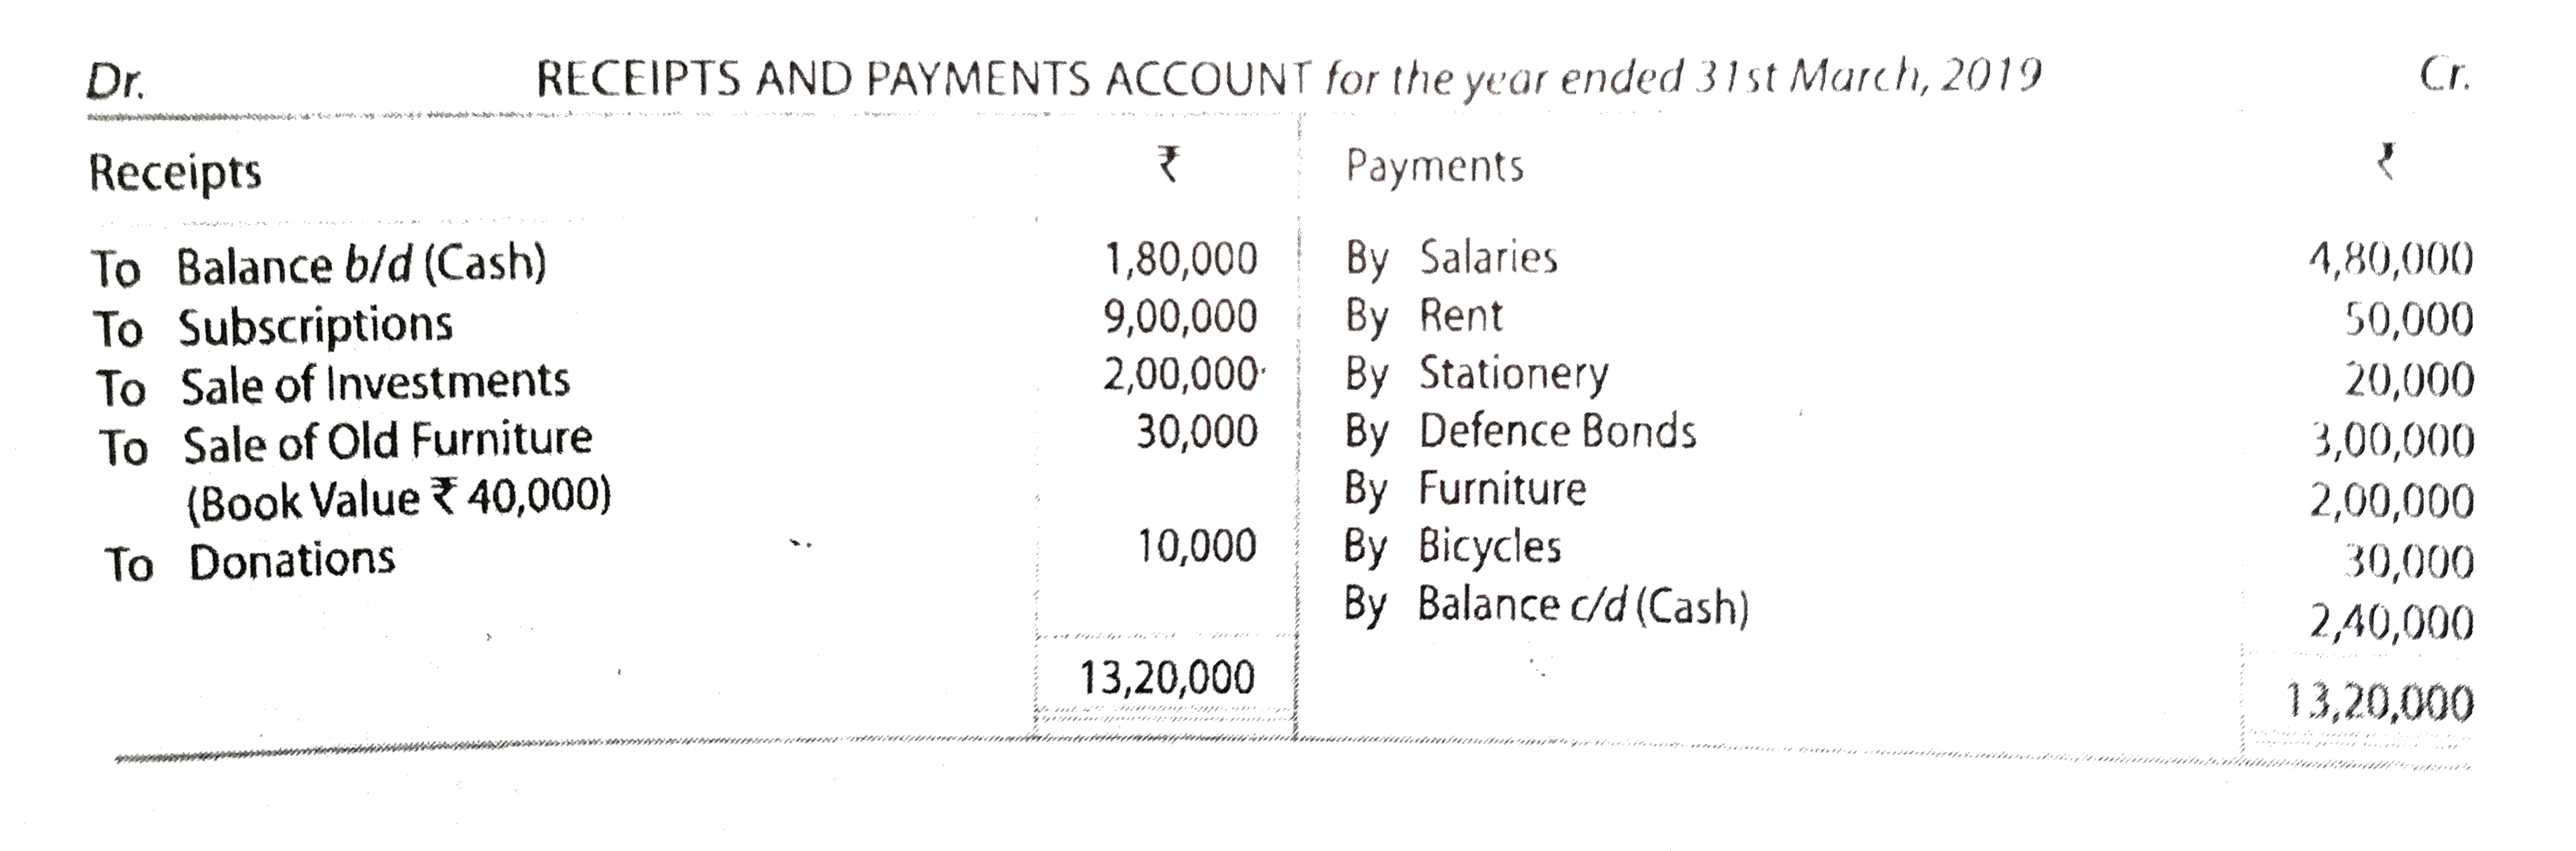 prepare income and Expenditure account for the  year ended 31st March 2019 from the following :